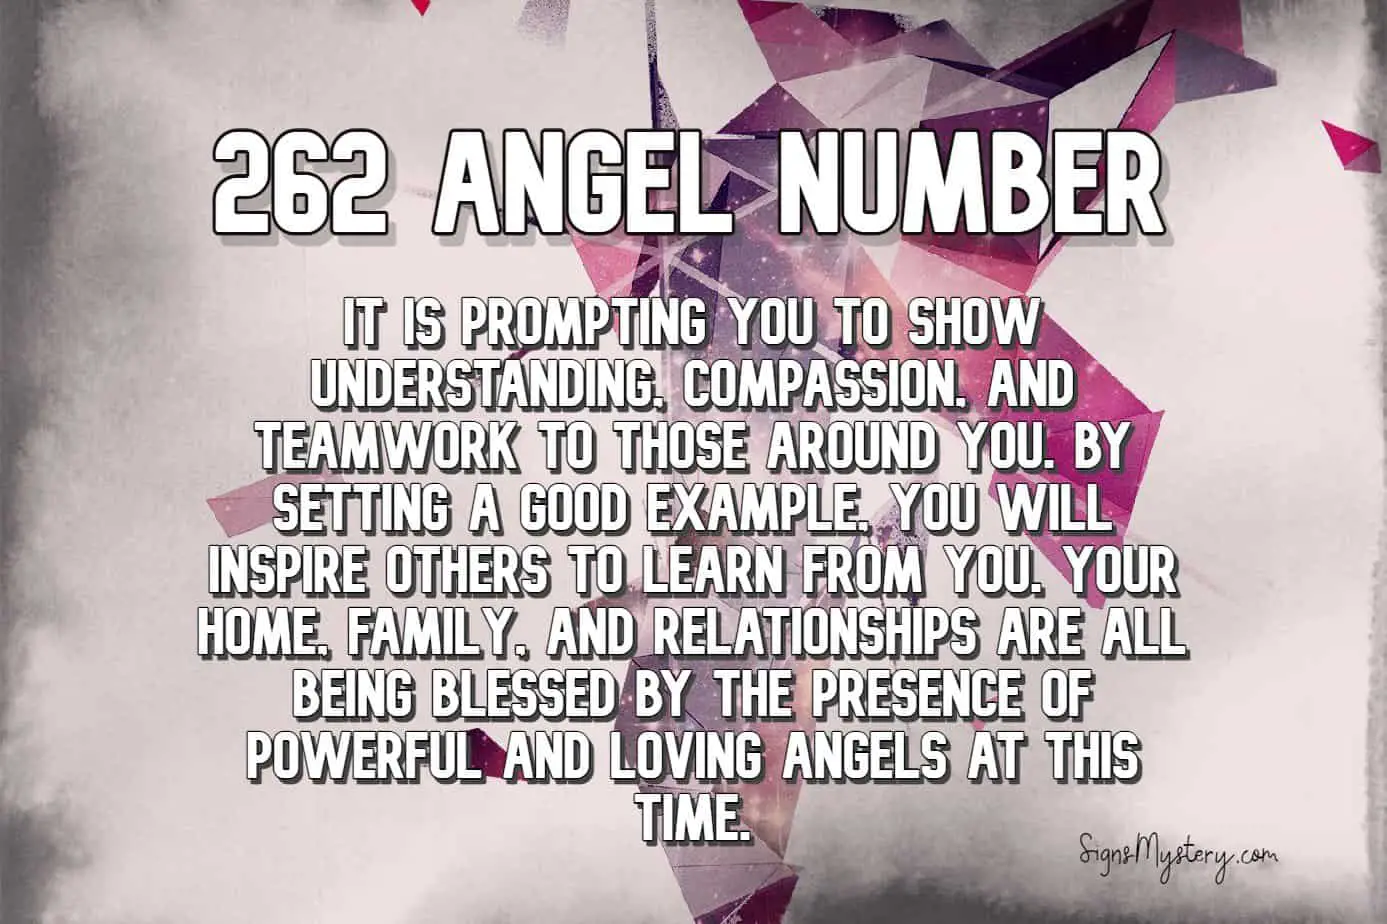 262 angel number meaning